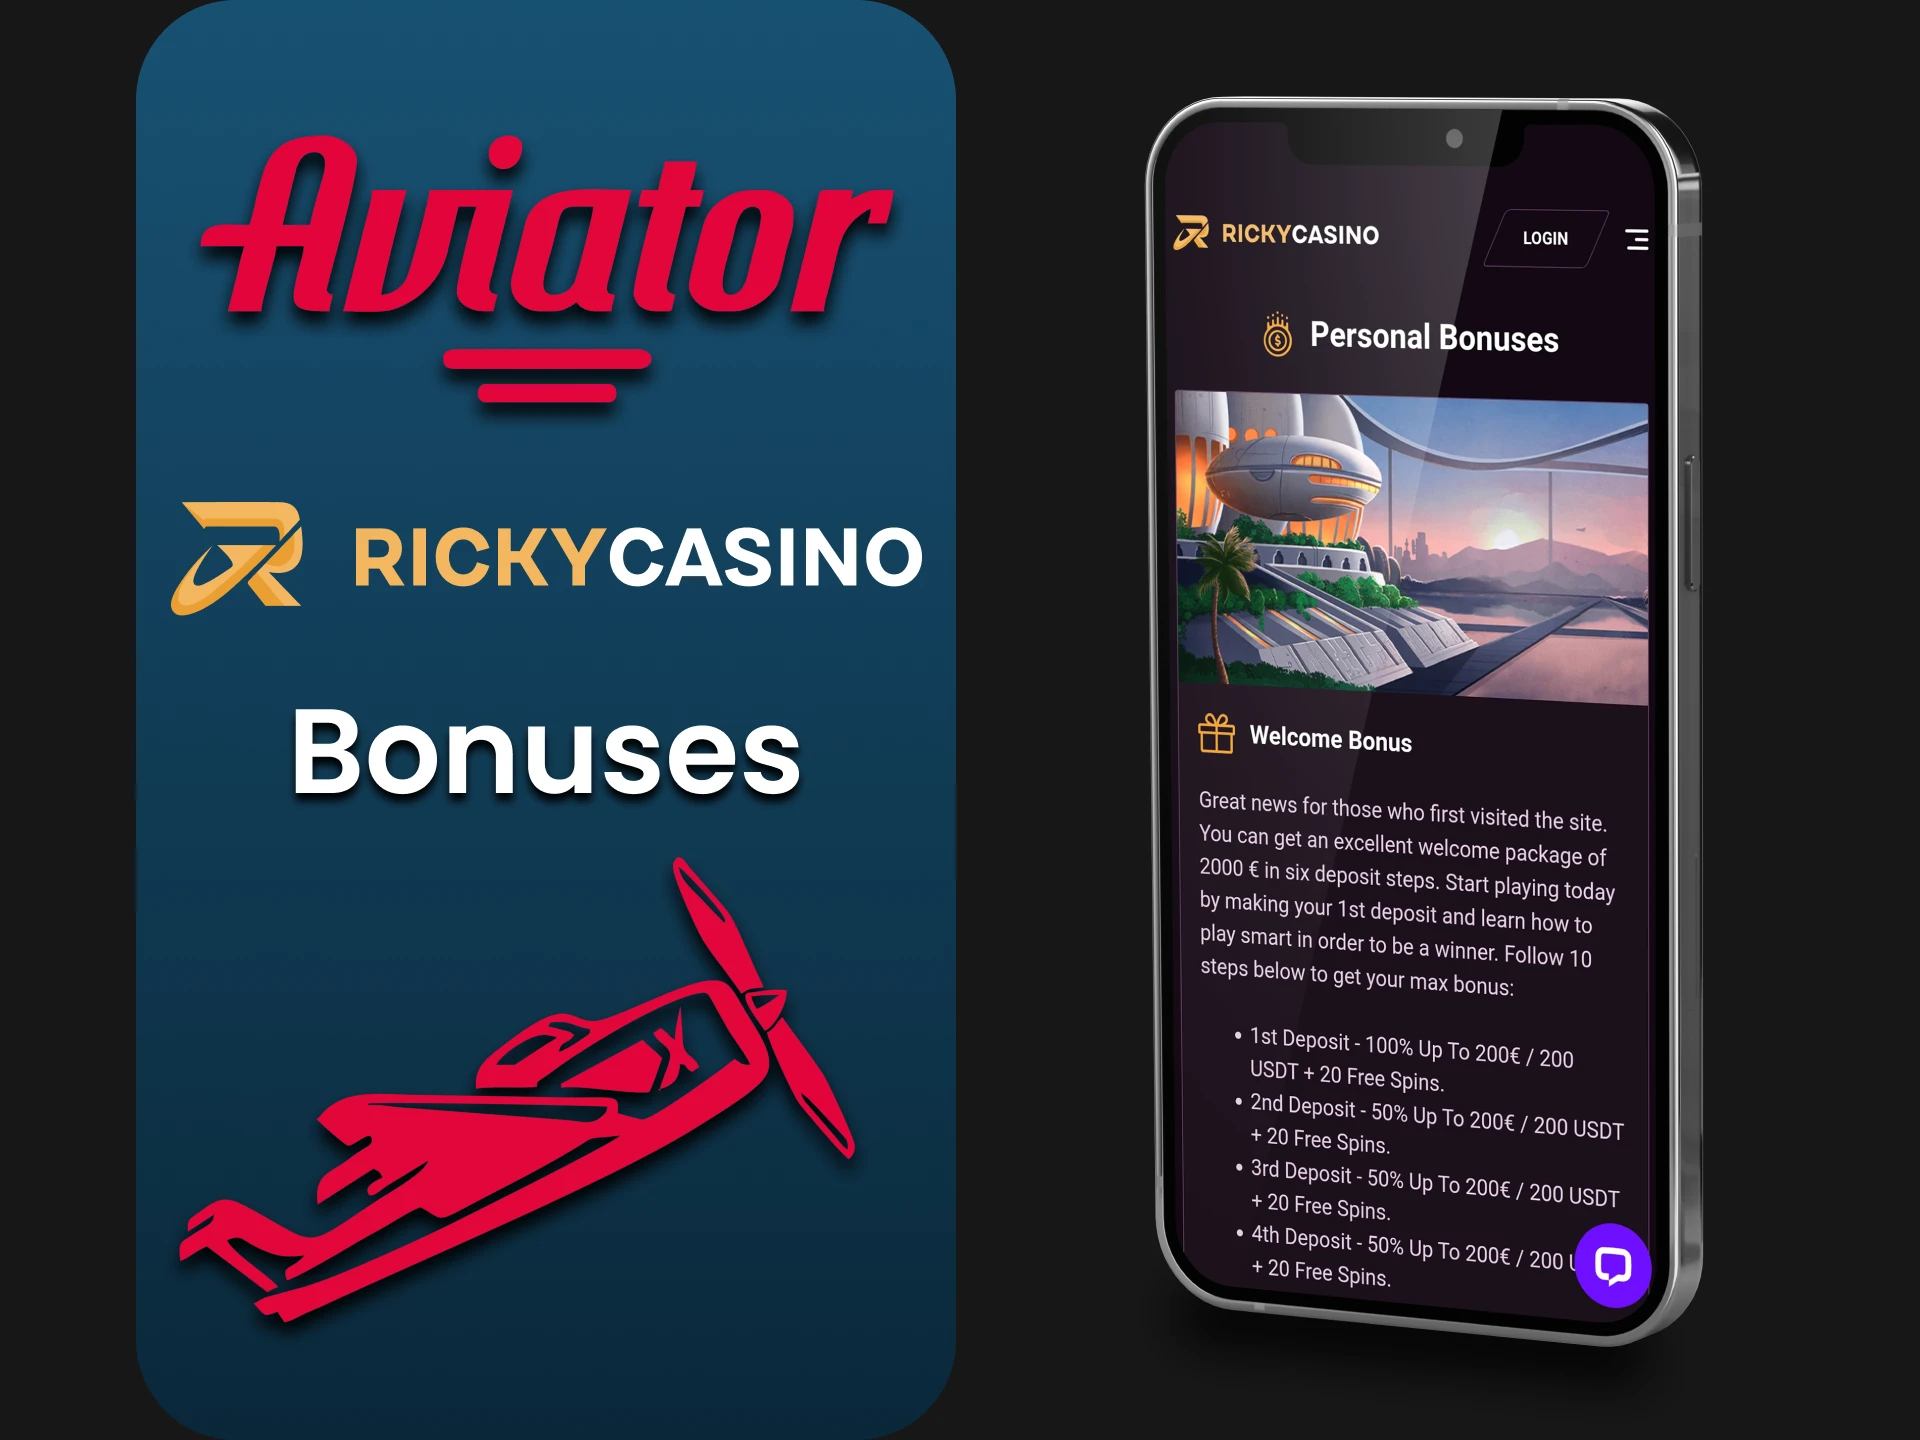 When you play Aviator in the Ricky Casino app you get a bonus.